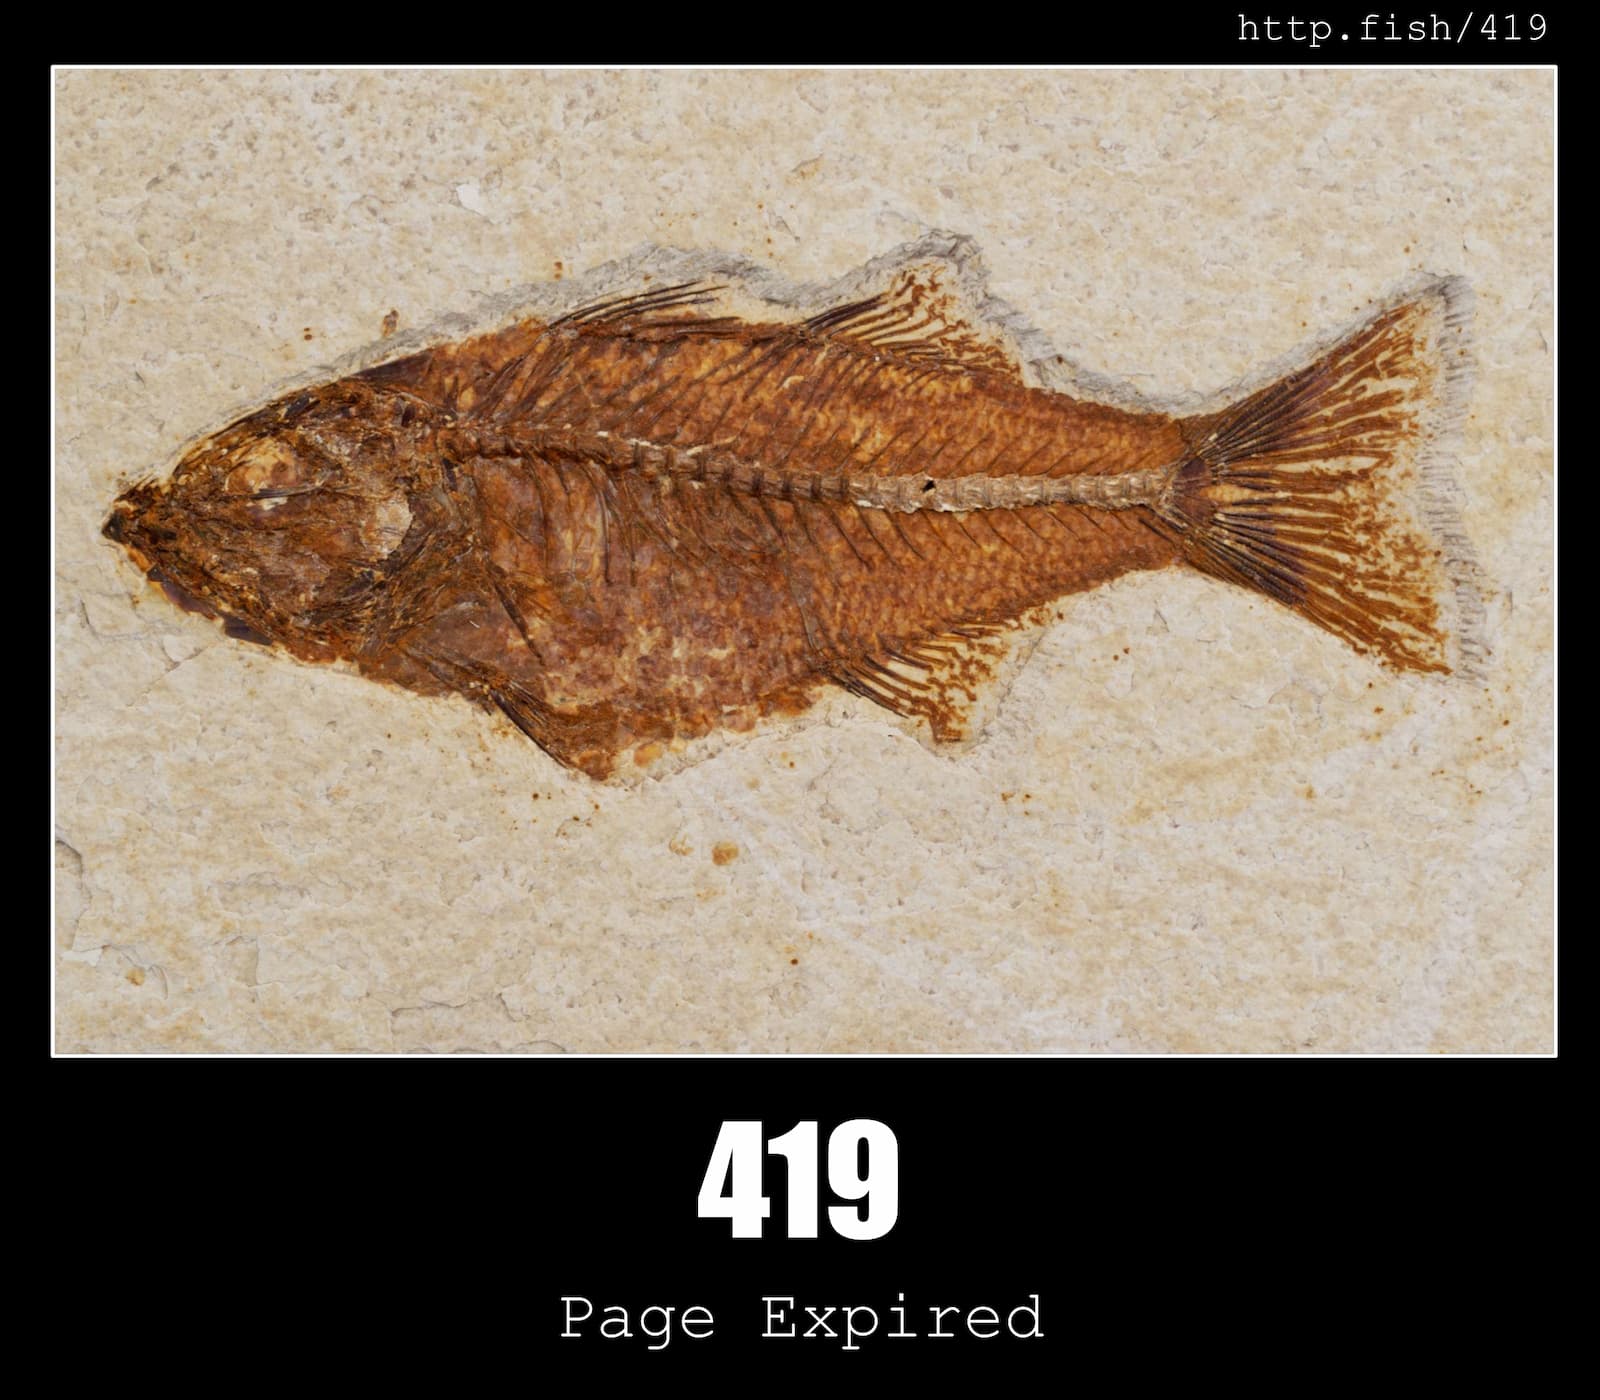 HTTP Status Code 419 Page Expired & Fish